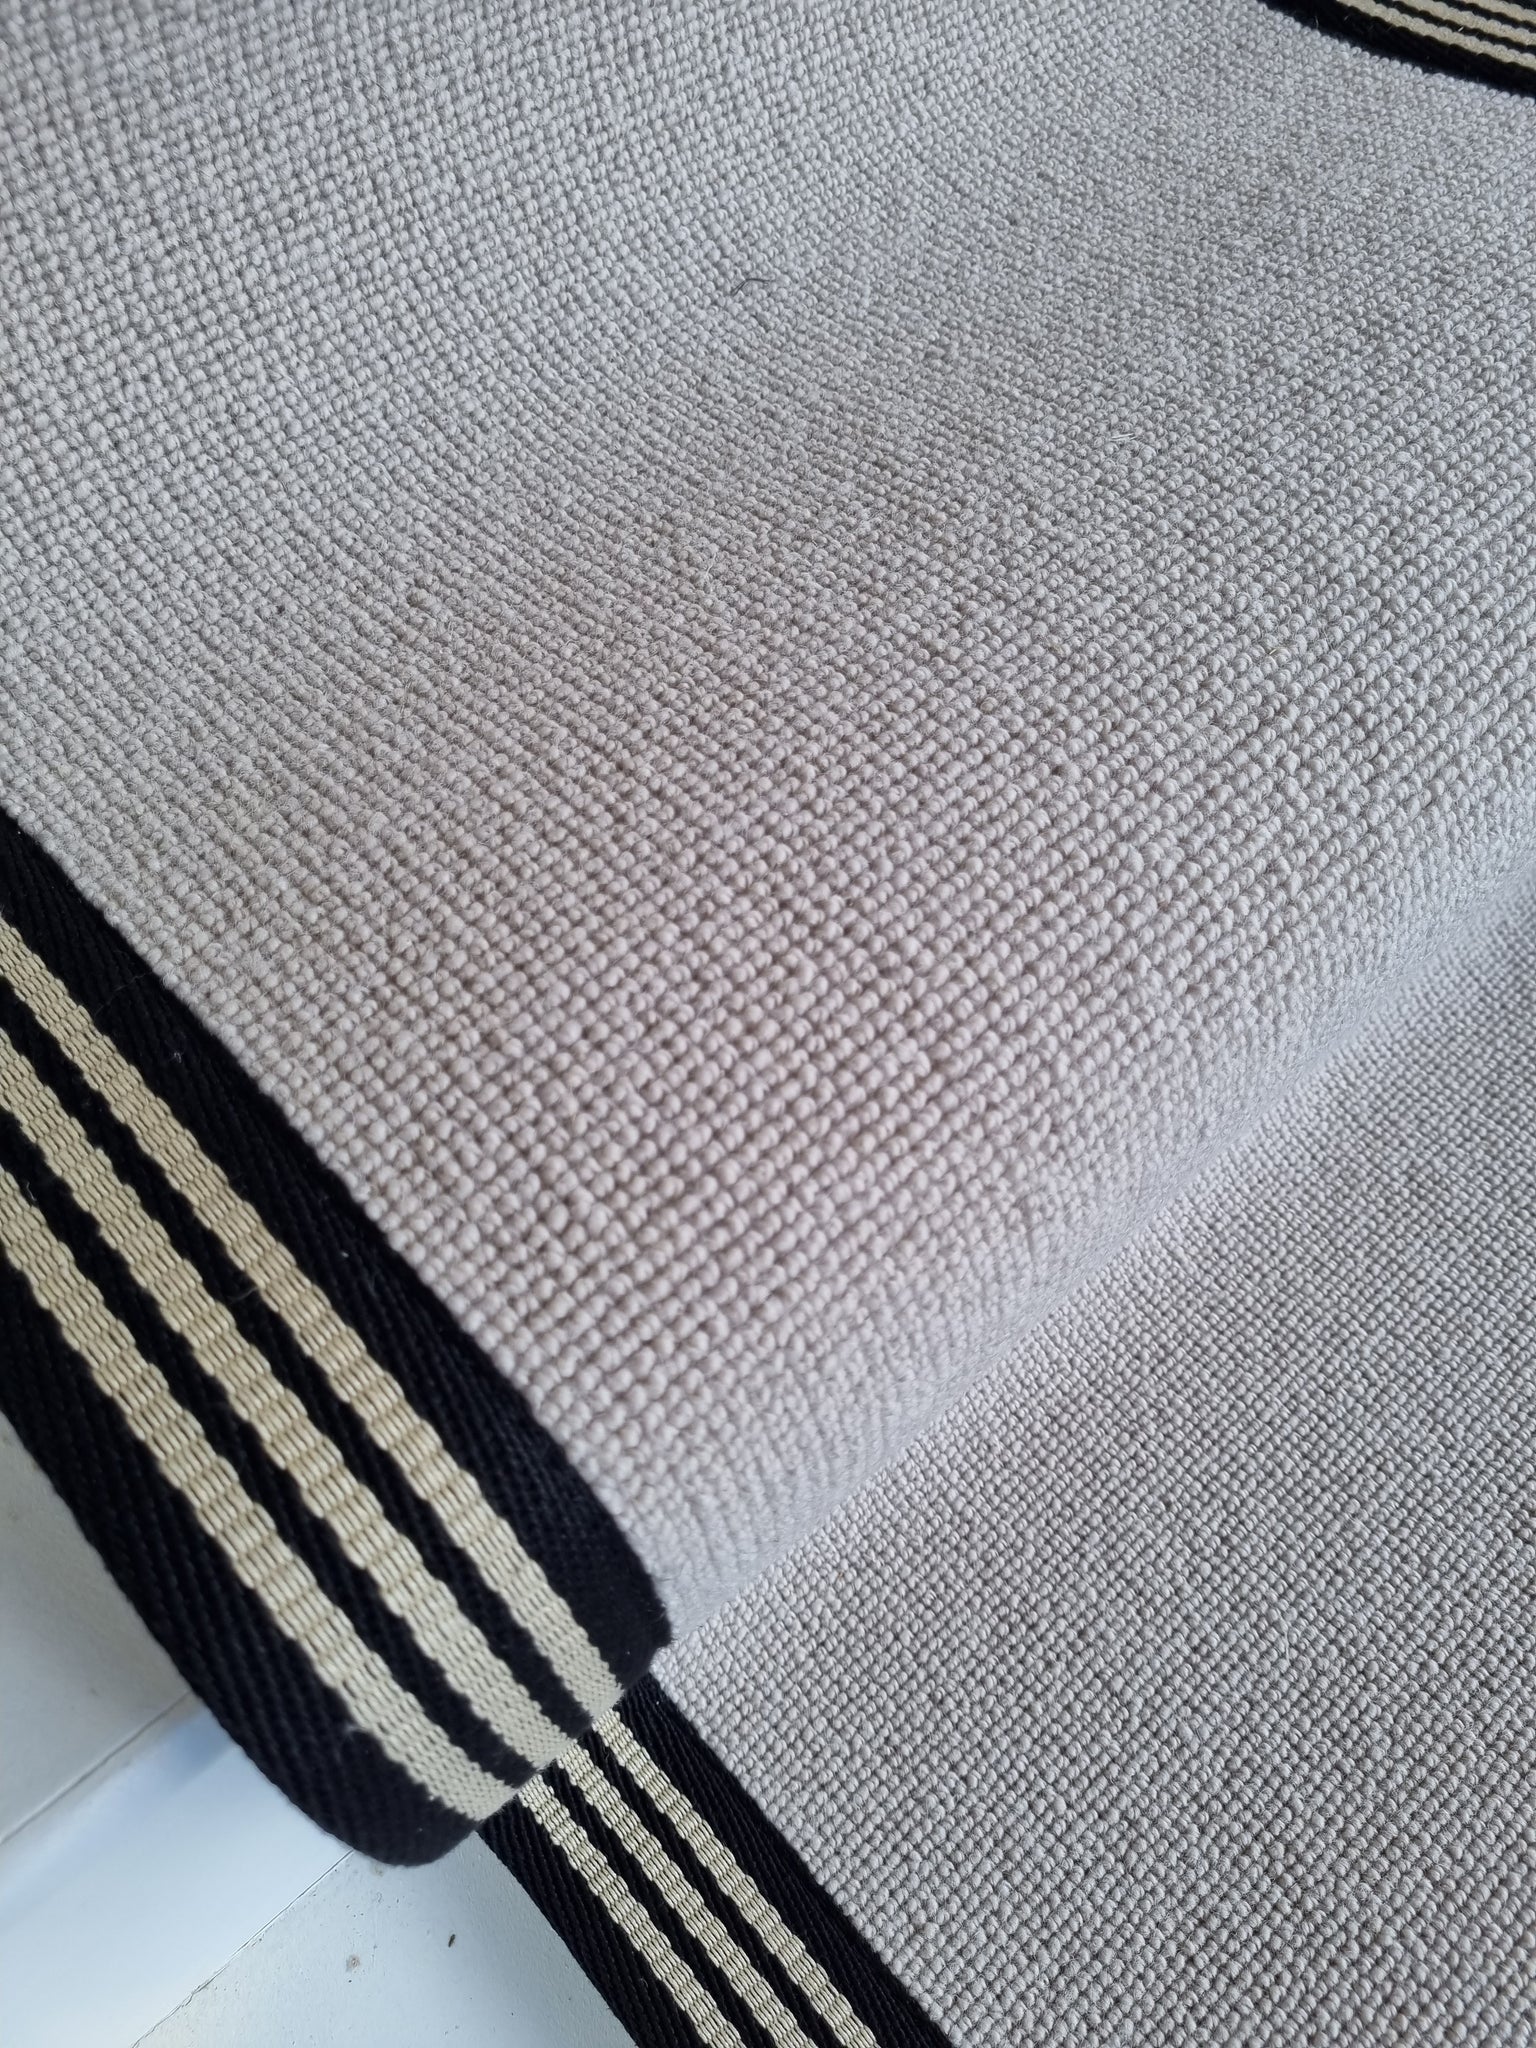 Cormar Pimlico Cement wool mix loop stair runner with striped black and white cotton border